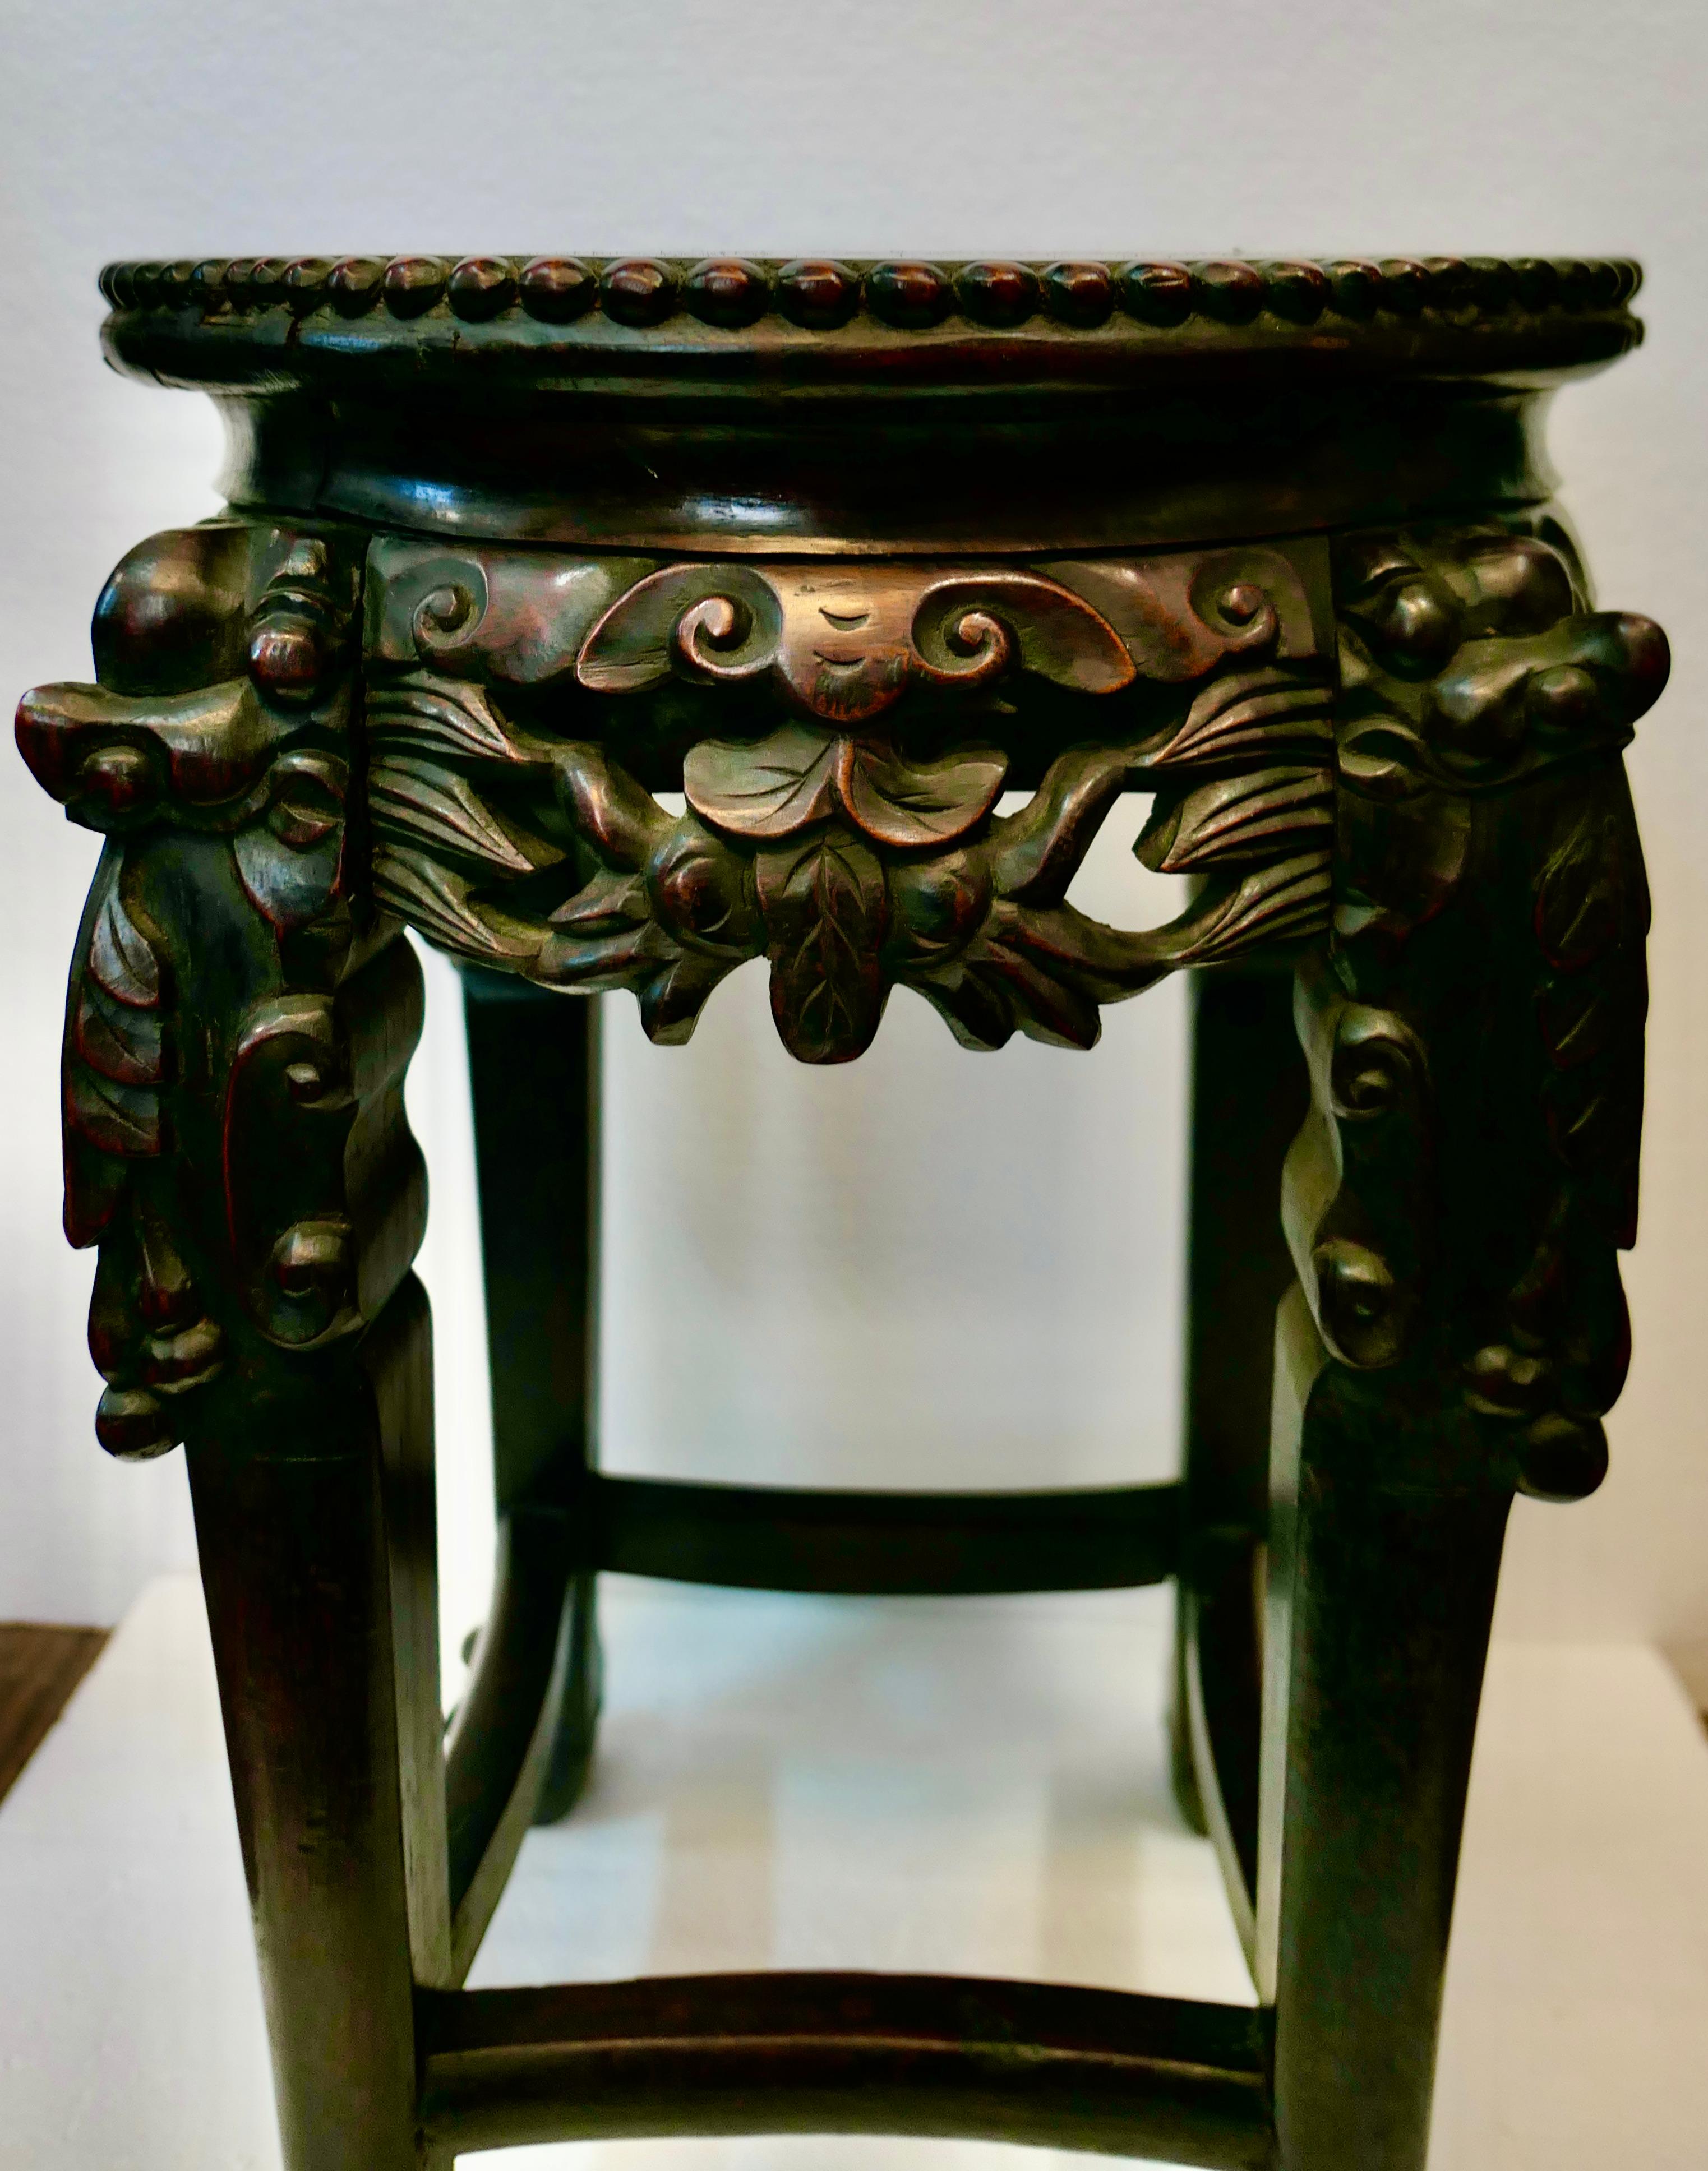 This vintage early 1900’s Chinese teak table is beautifully hand carved & superbly designed with four alternating carved apron panels & legs. These legs have a bold decorative motif accented with ball & claw feet. Four connecting braces support